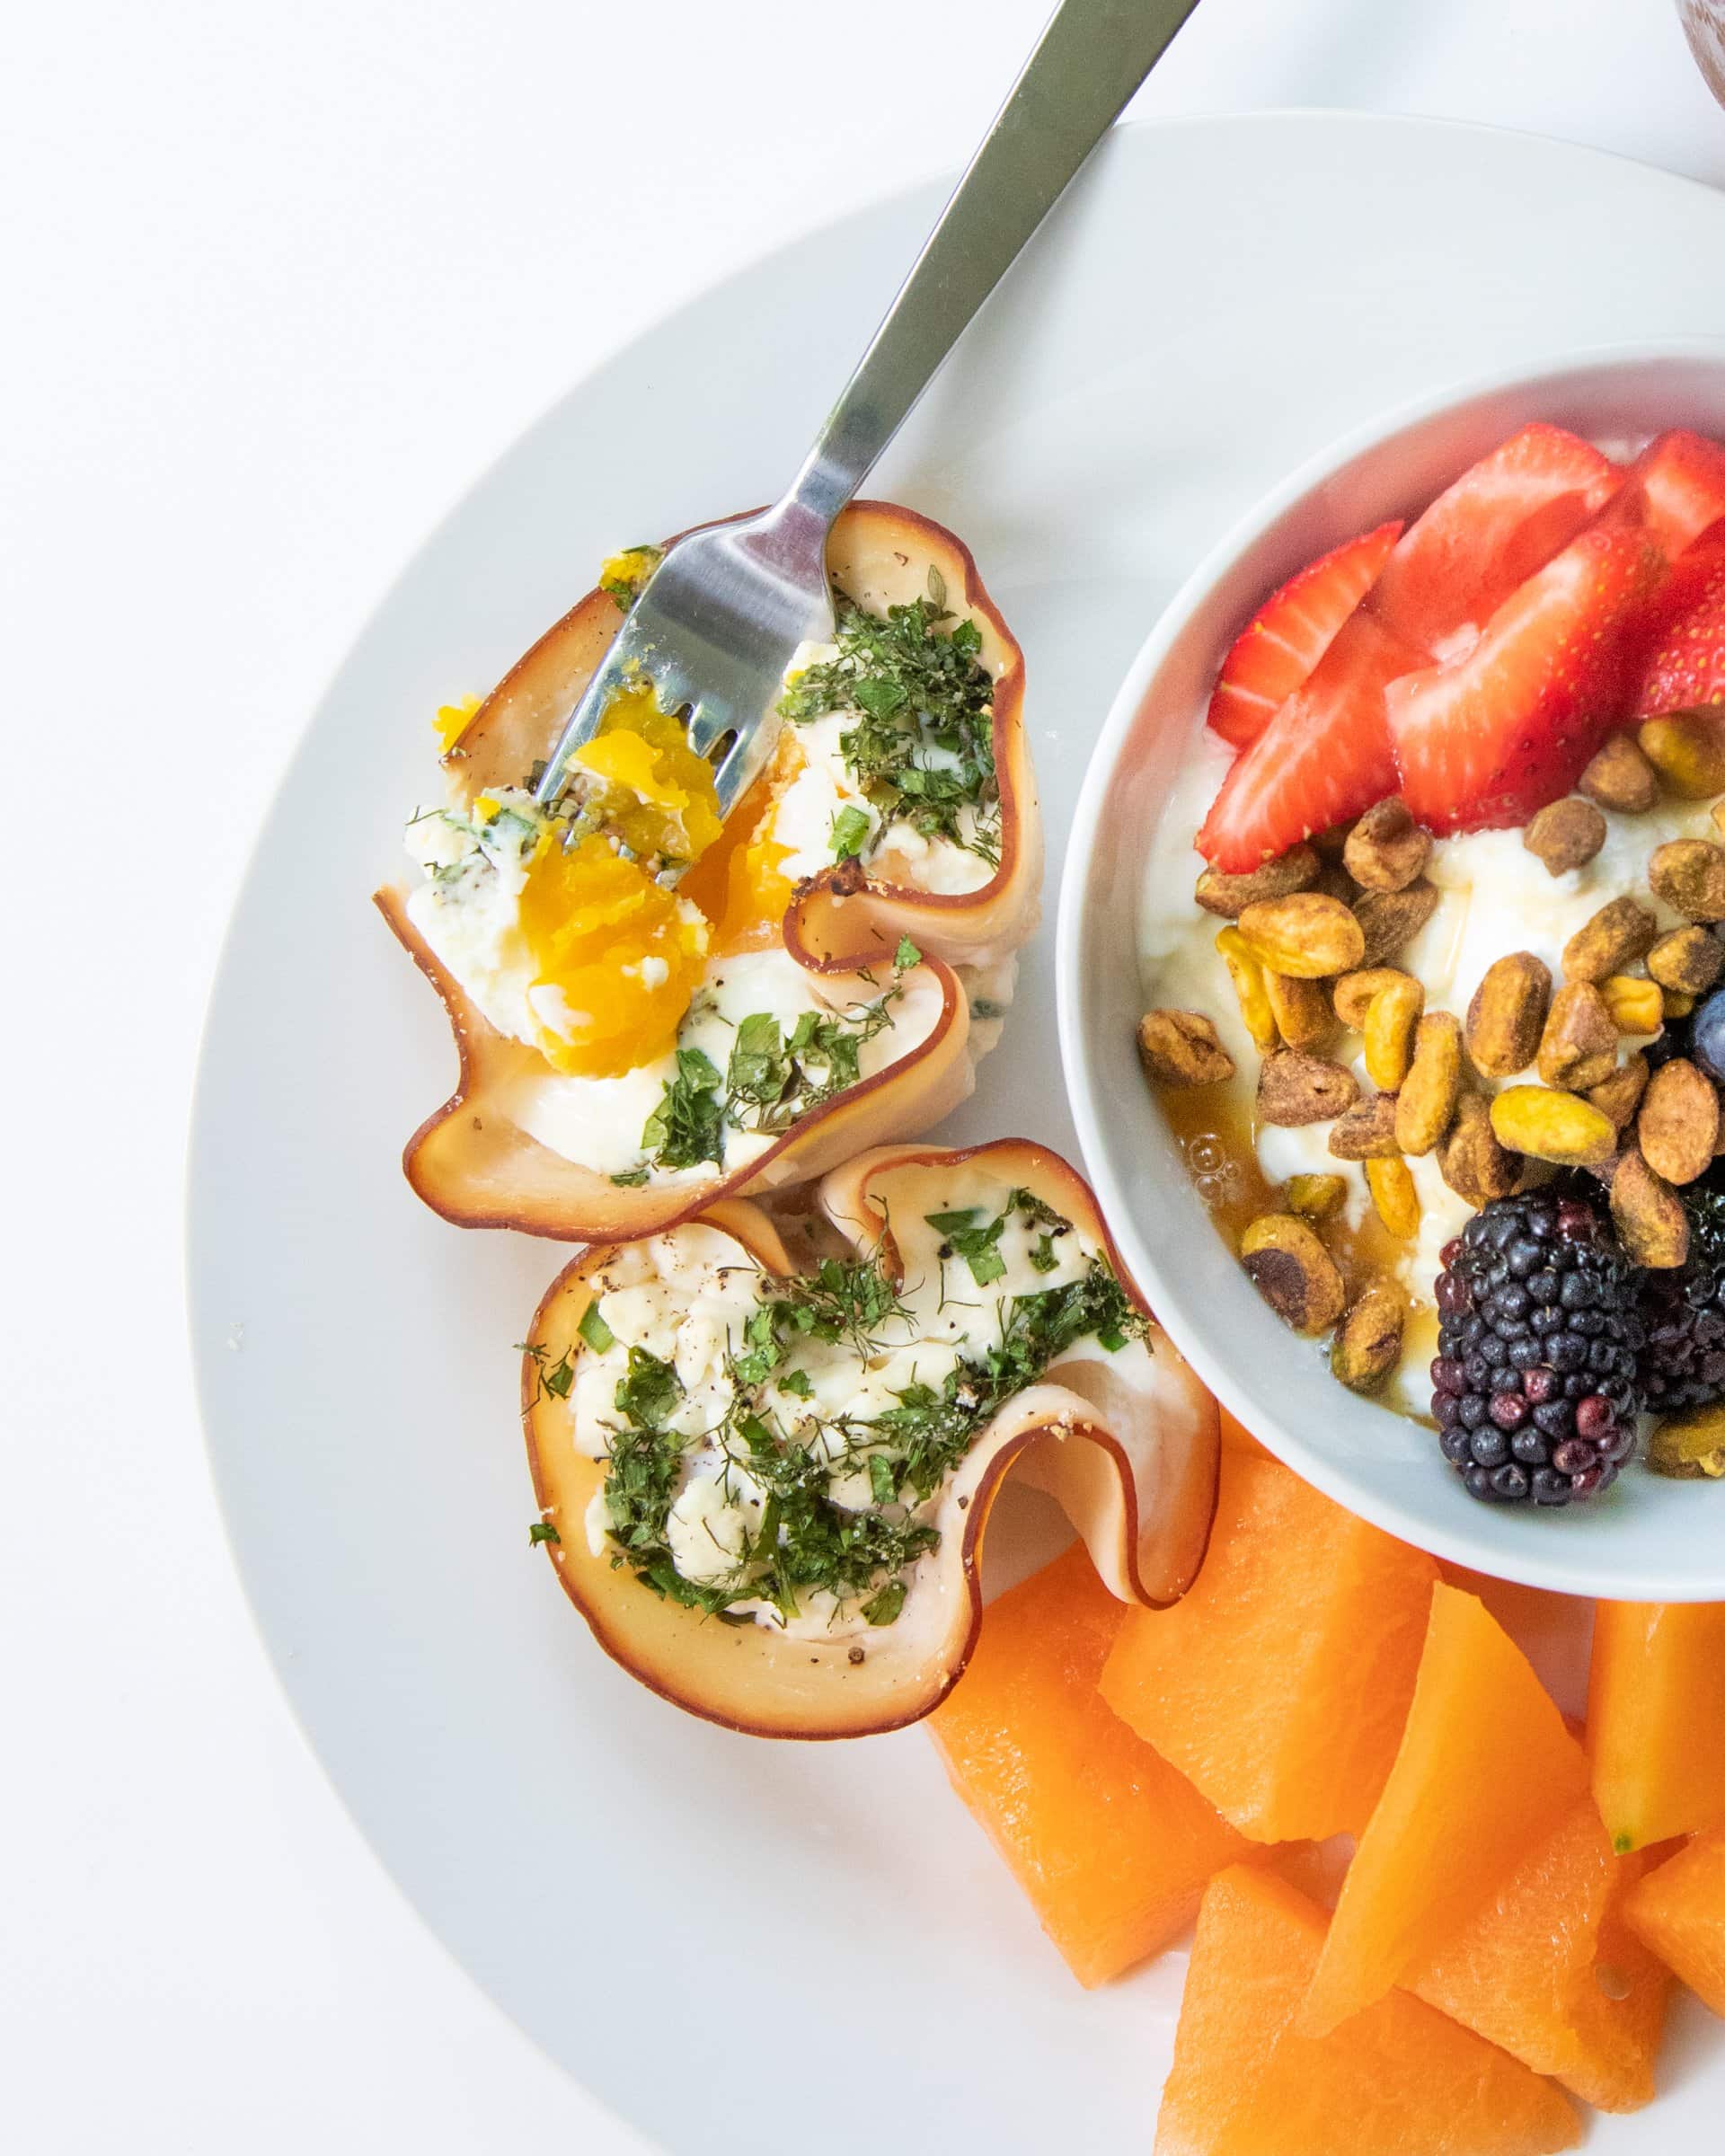 Egg cups made with turkey and herbs sit on a white plate. A bowl of fruit and yogurt sits to the side.